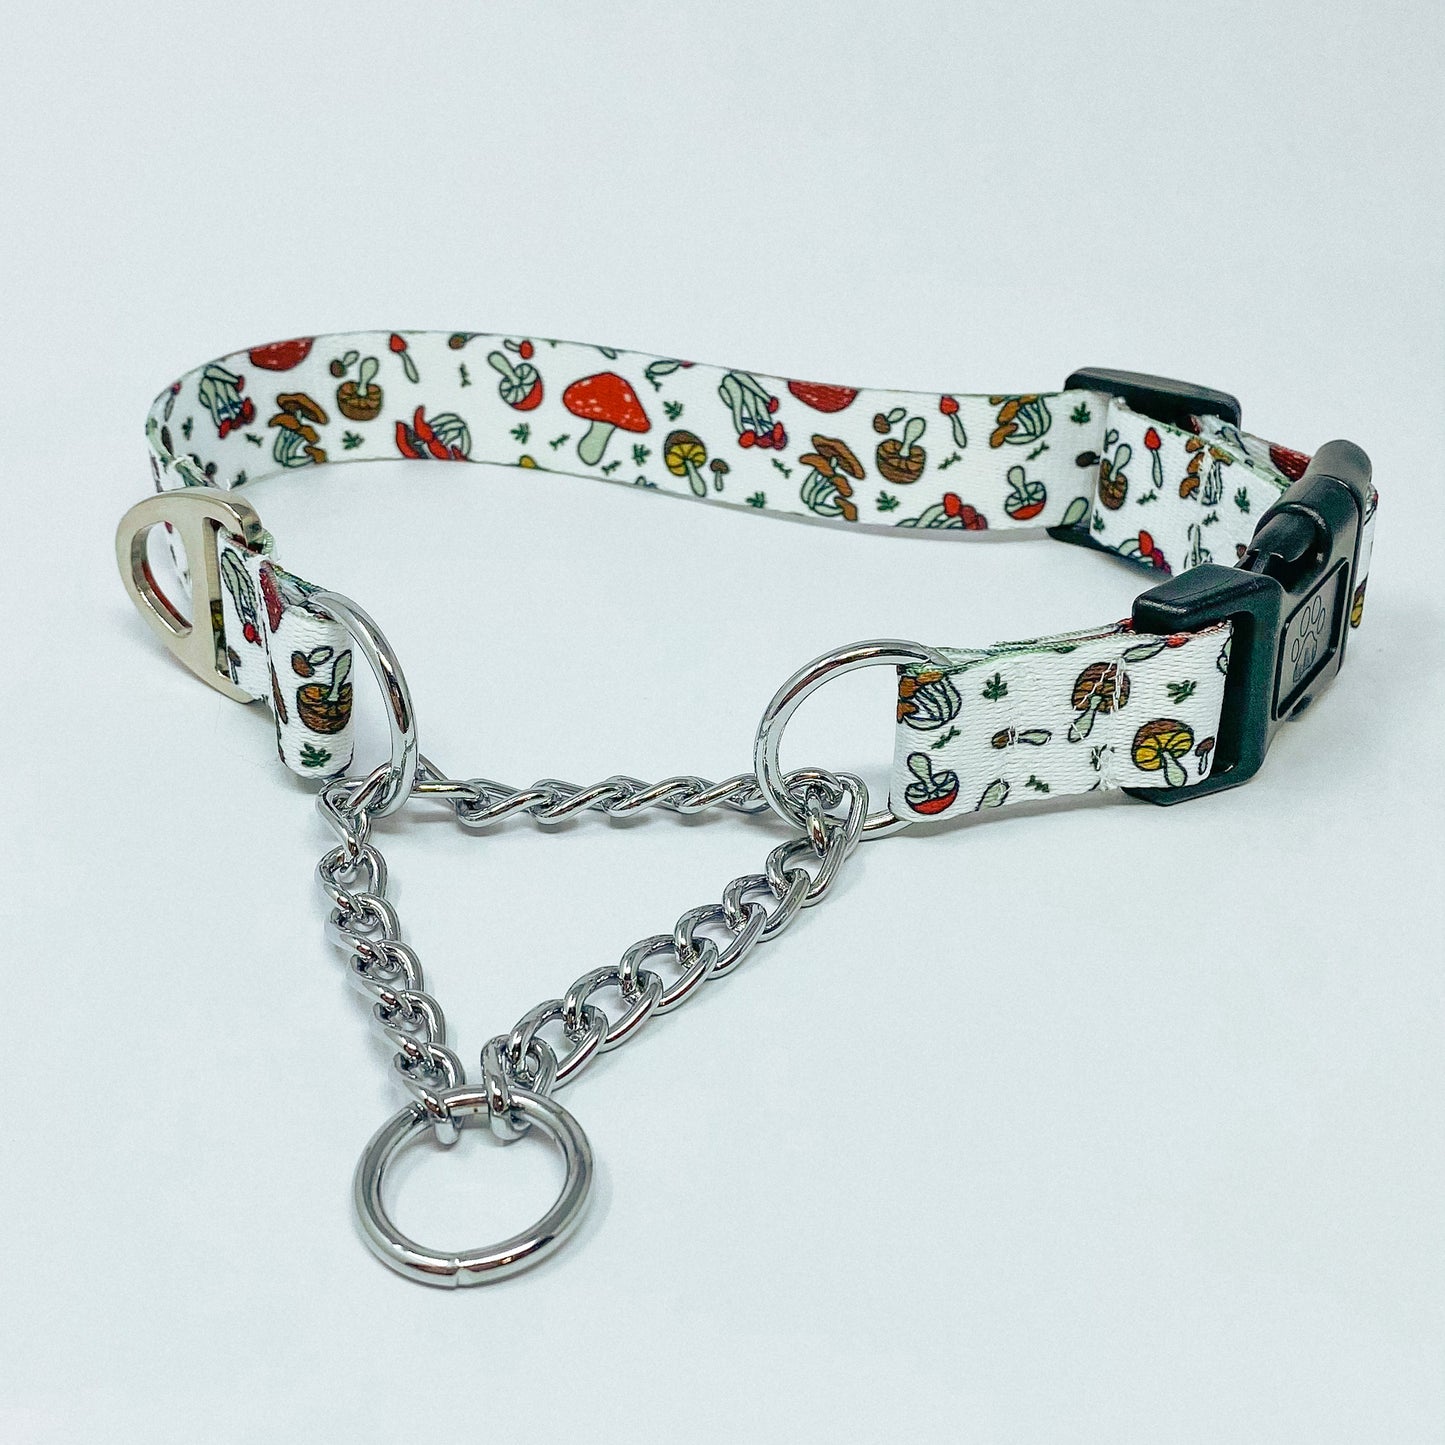 Fun-guy Recycled Martingale Dog Collar